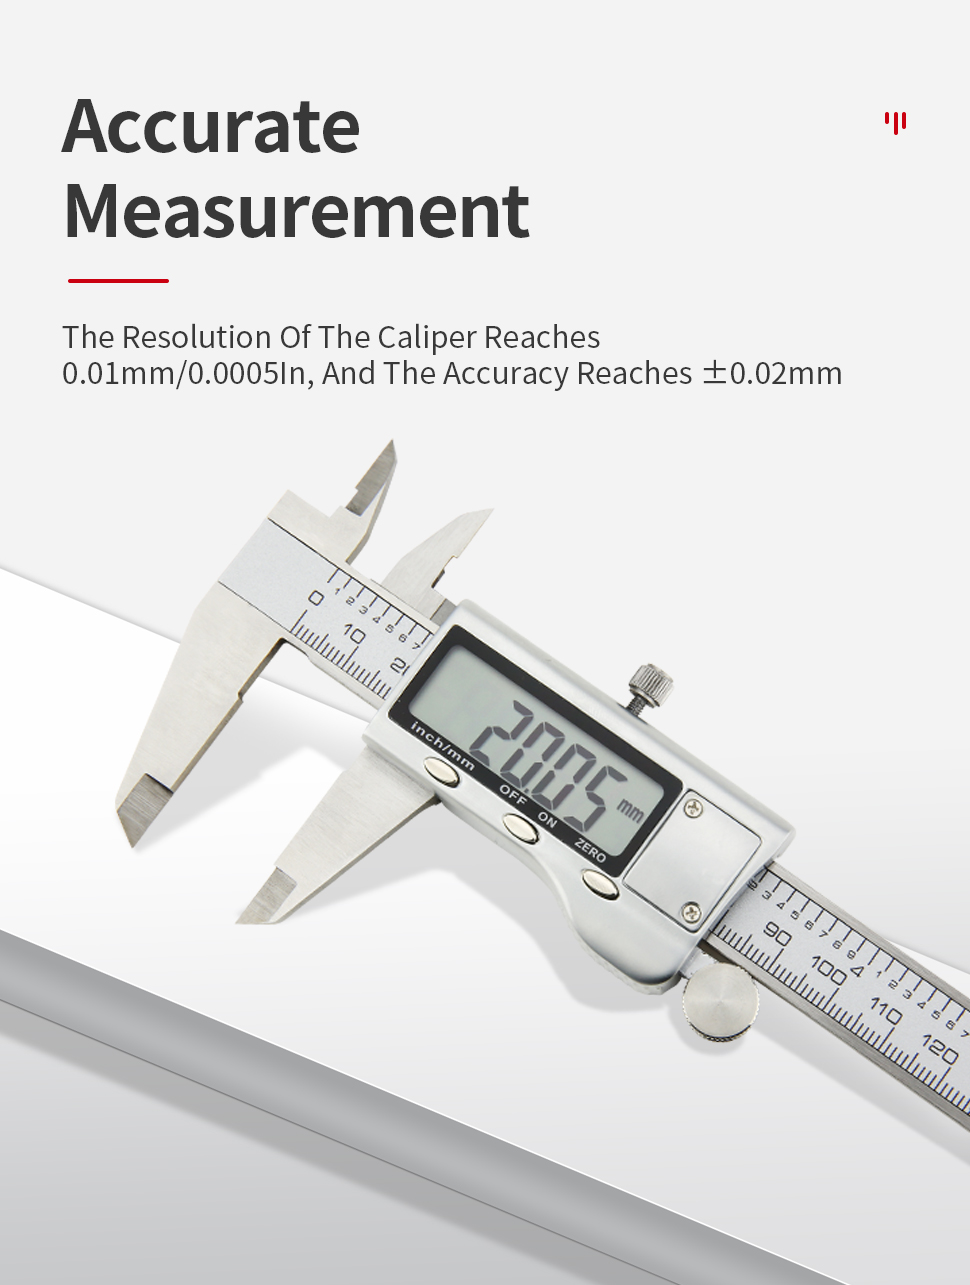 Stainless-Steel-Digital-metal-Fraction-Caliper-150mm-mm-Inch-High-Precision-large-LCD-display-Vernie-1524240-2